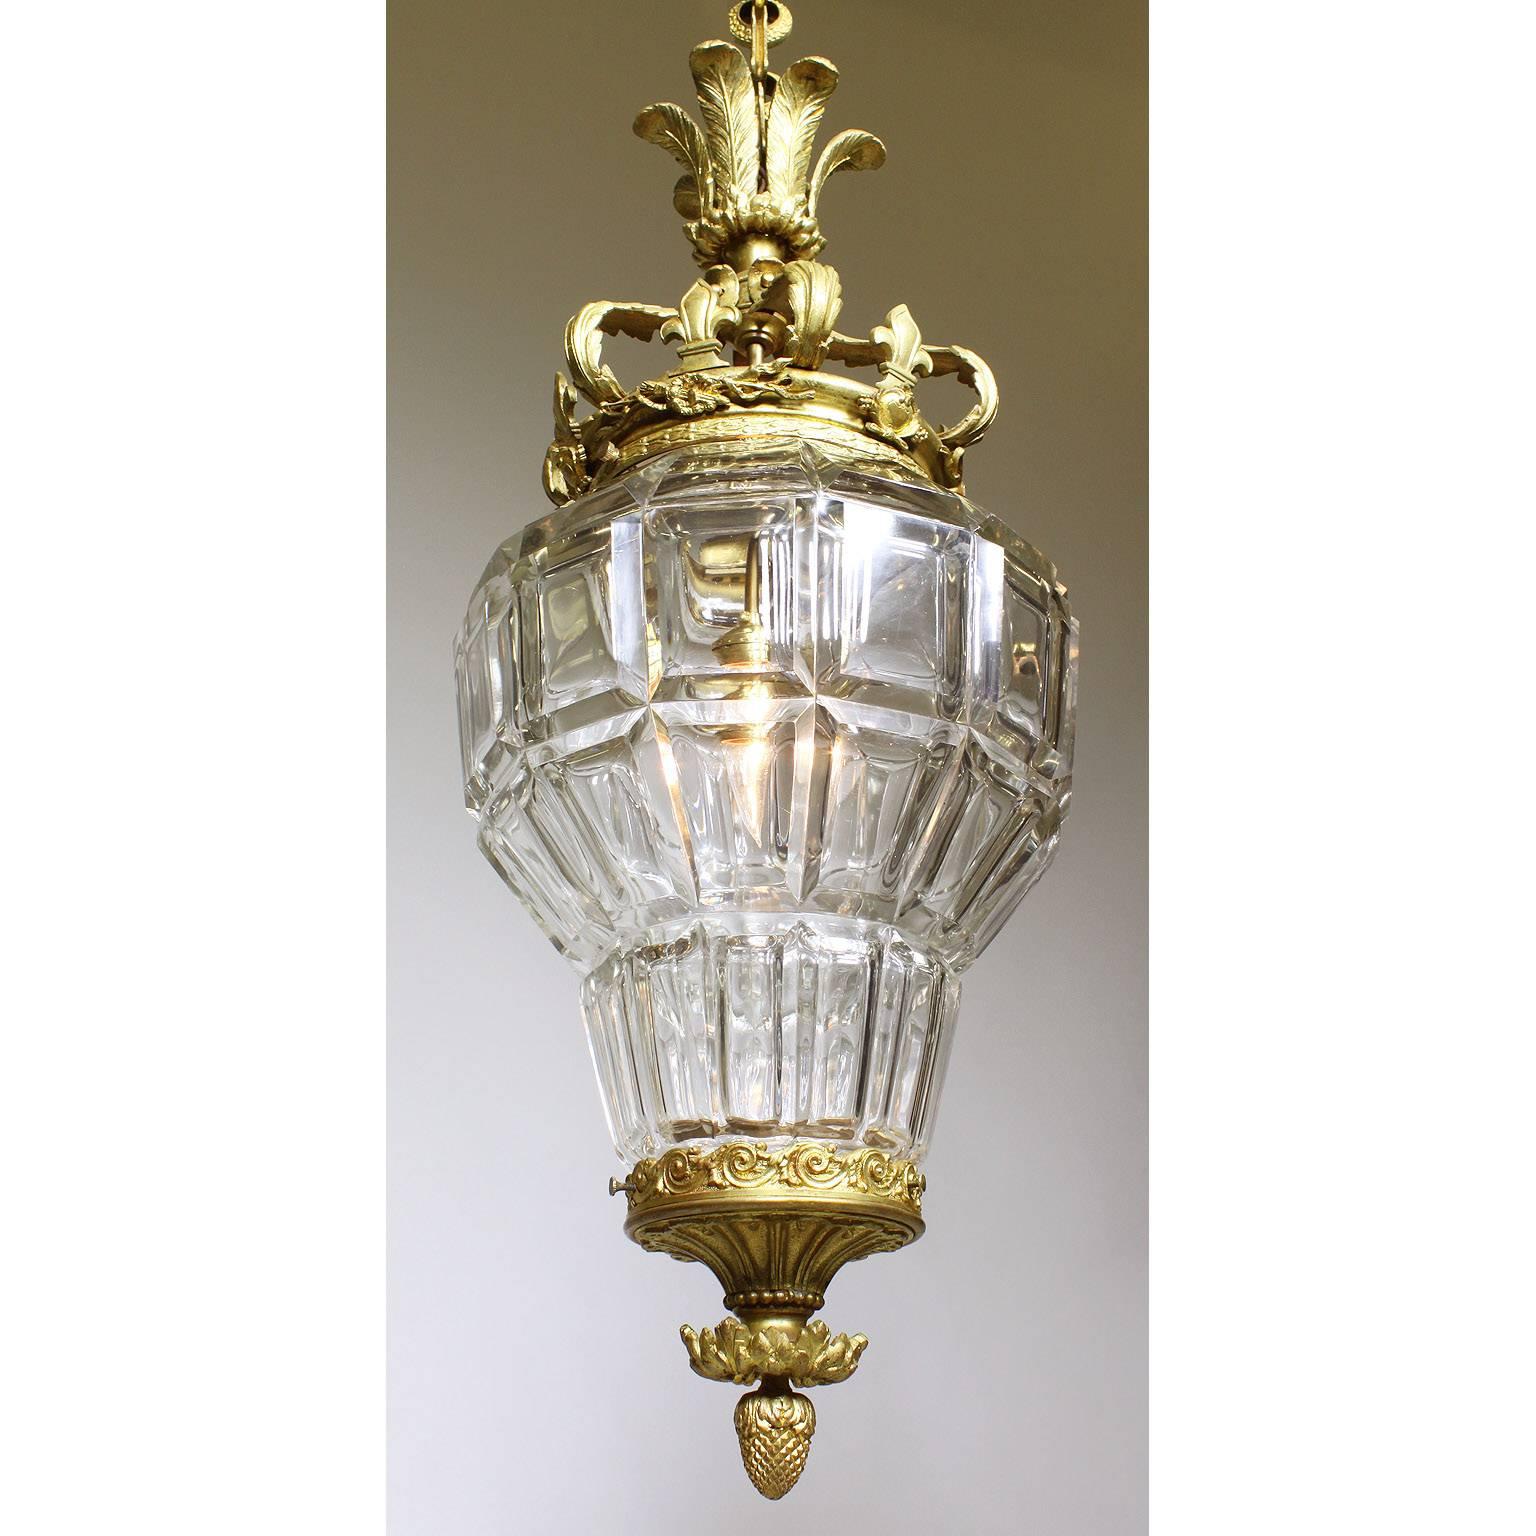 A fine French 19th-20th century gilt bronze and molded cut-glass 